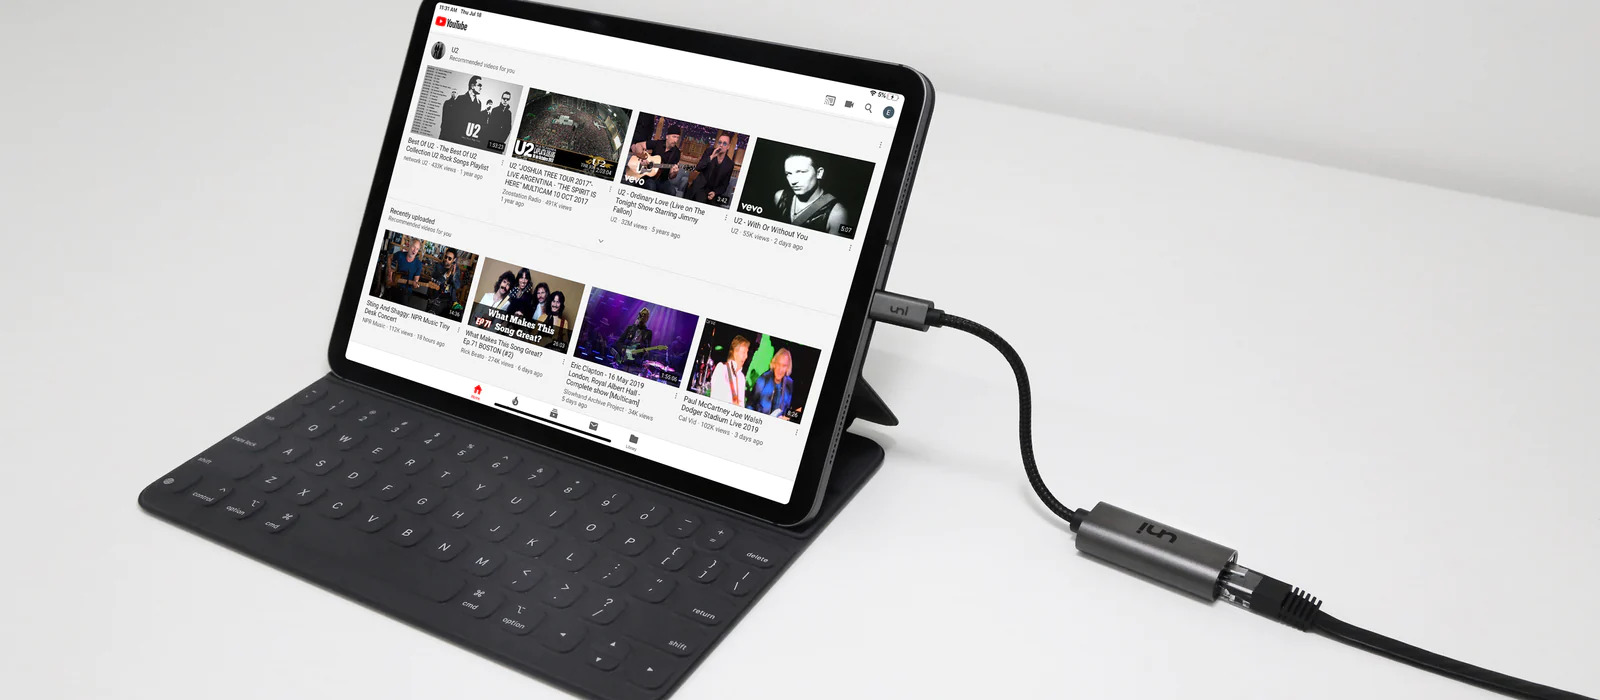 How To Connect USB Modem To Tablet